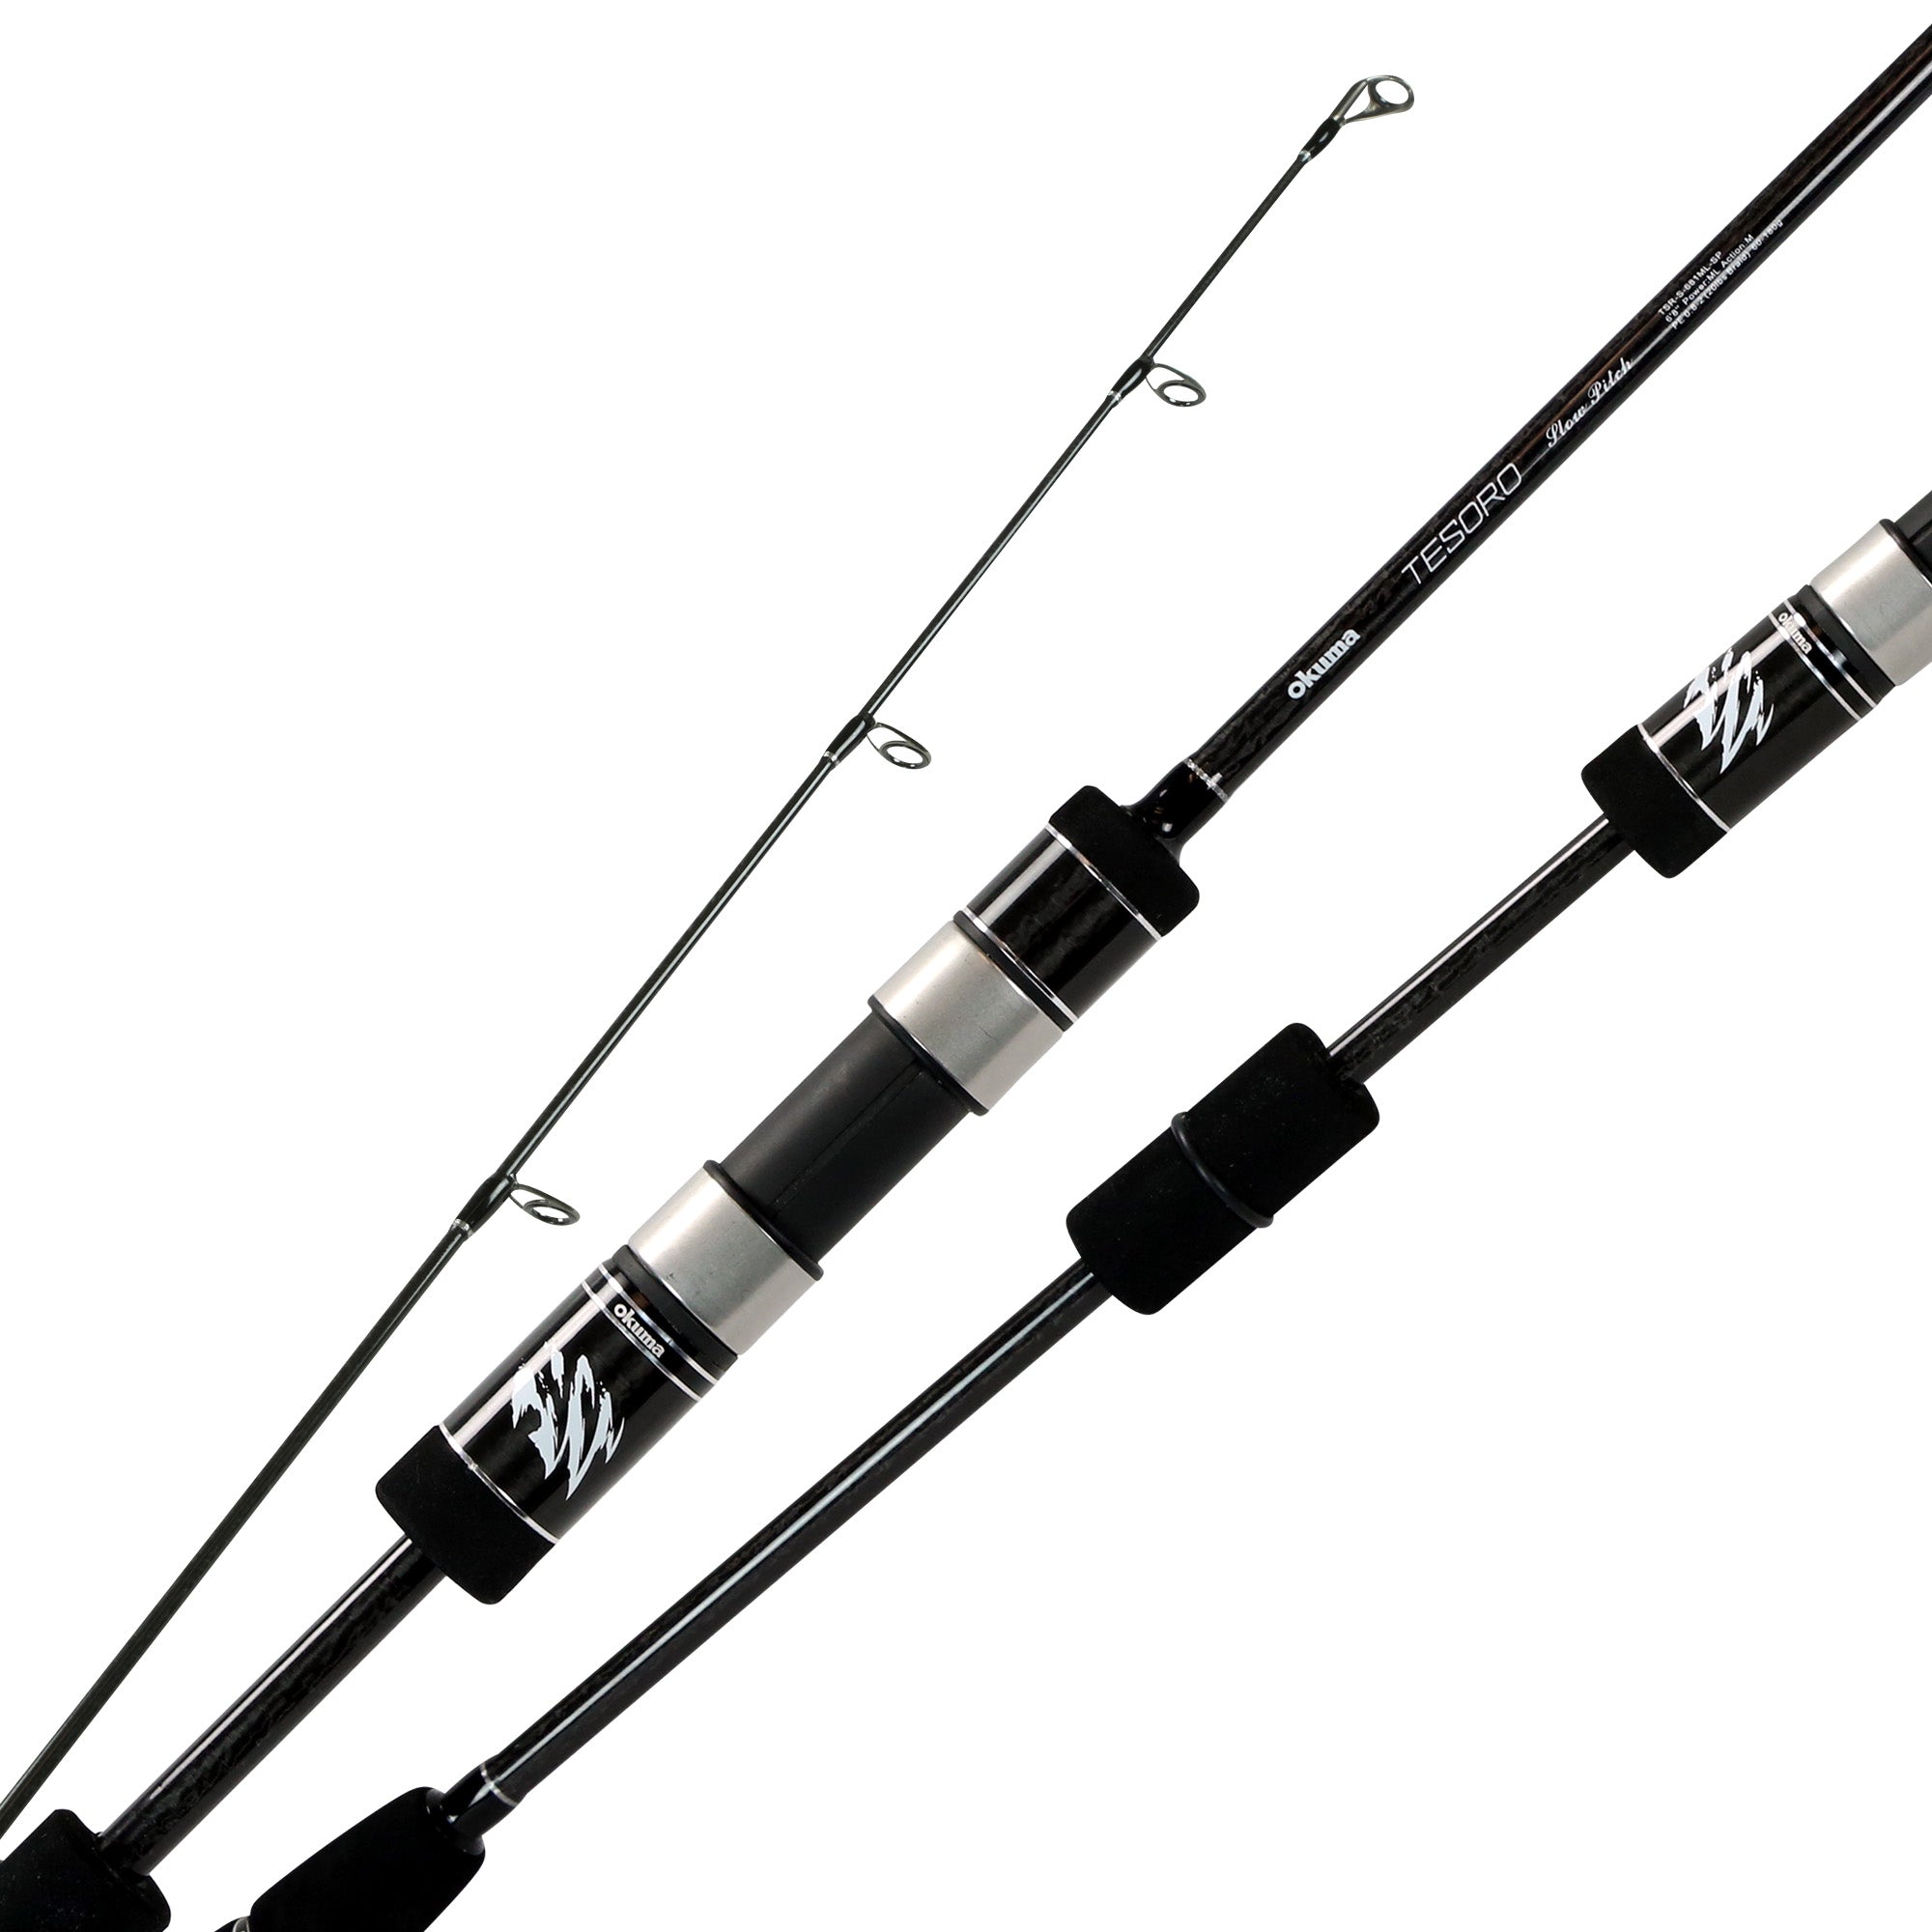 Okuma Guide Select Pro Spinning Rods CHOOSE YOUR SIZE!